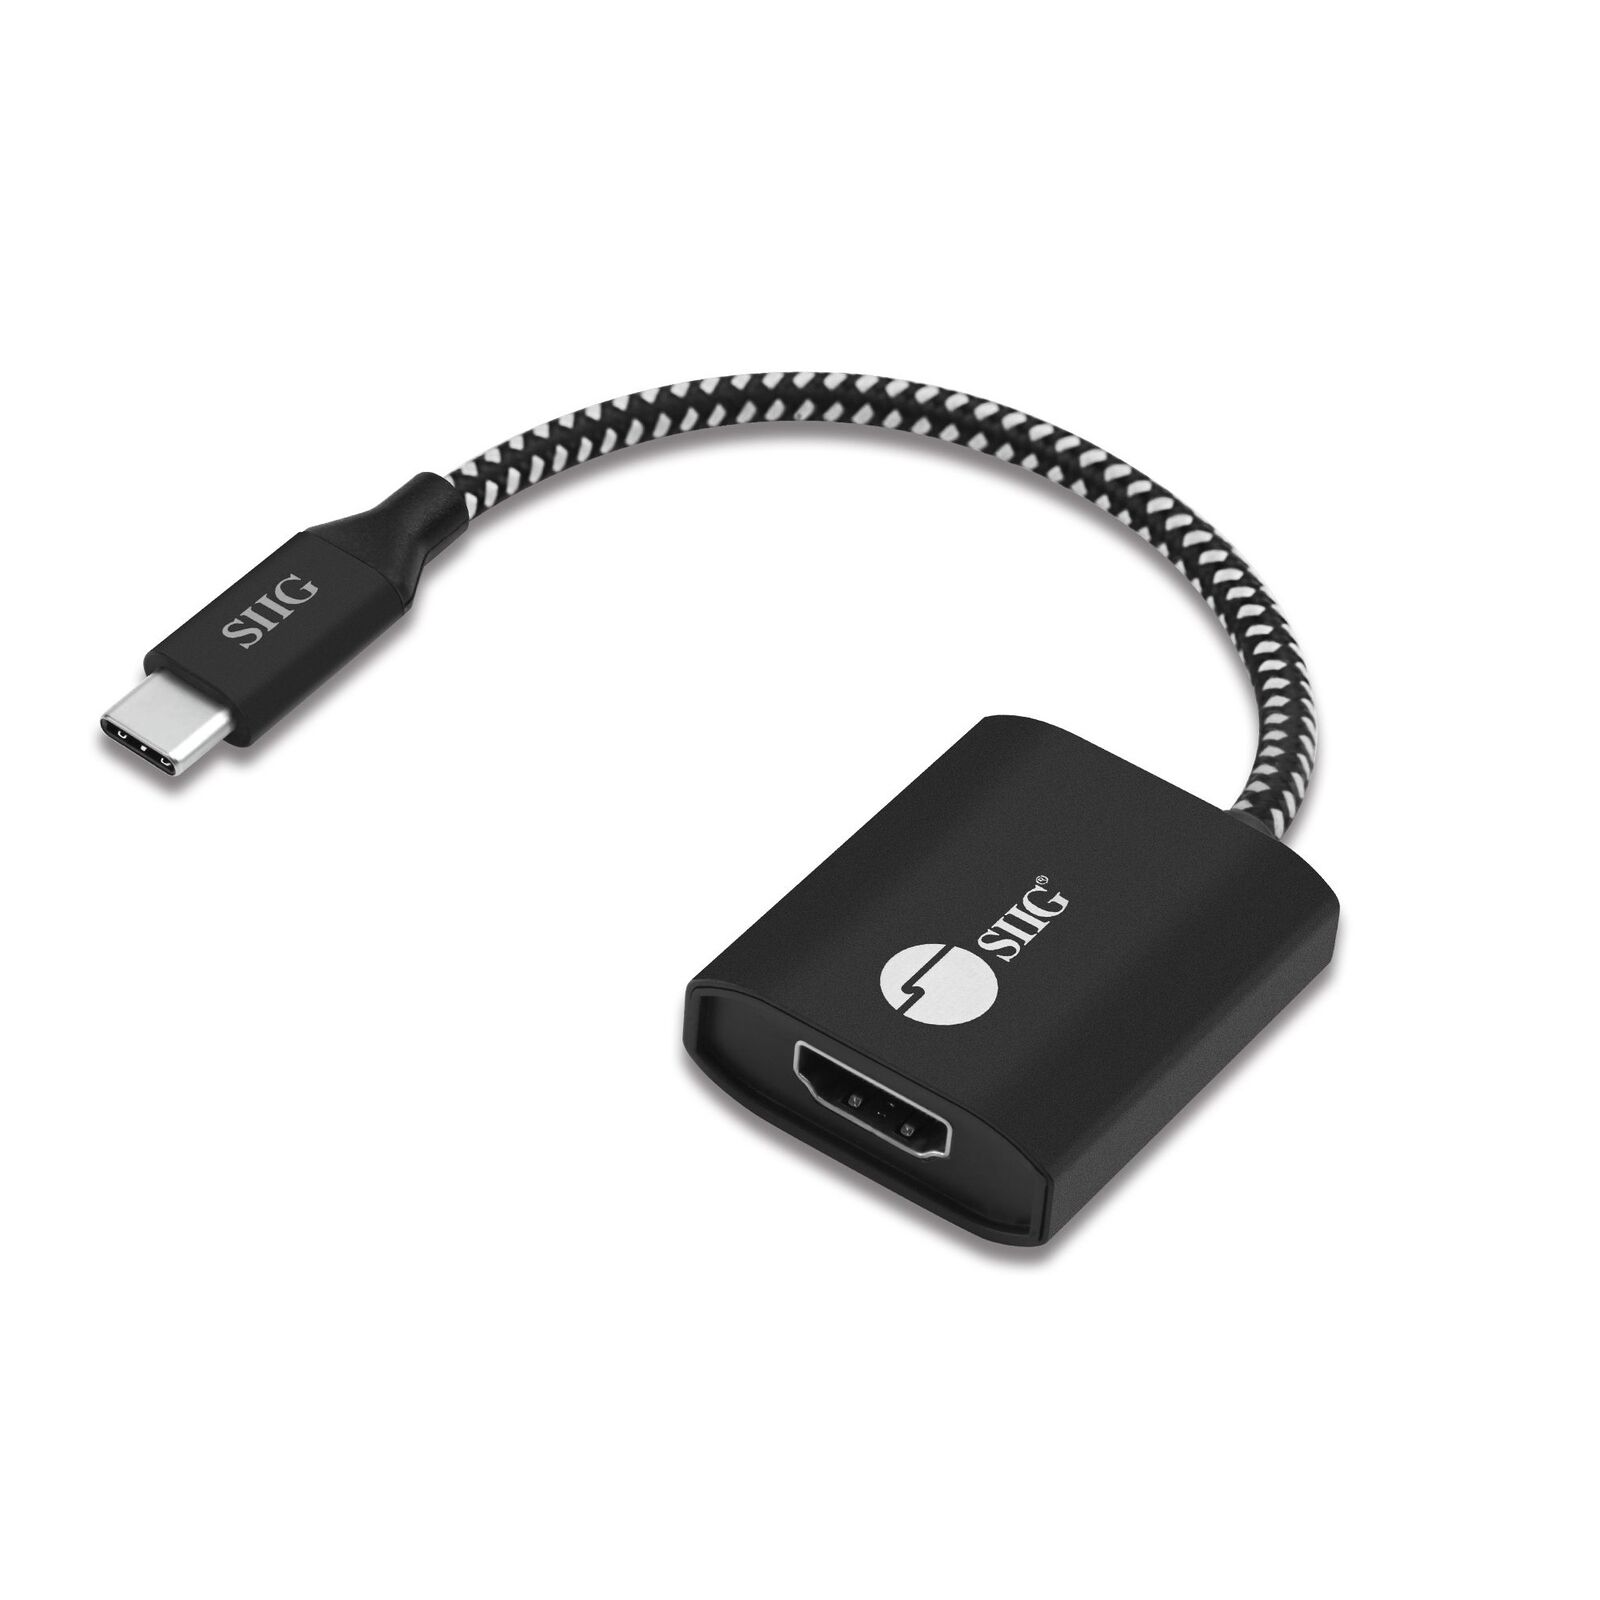 SIIG USB Type-C to HDMI Video Cable Adapter with PD Charging (CB-TC0811-S1)